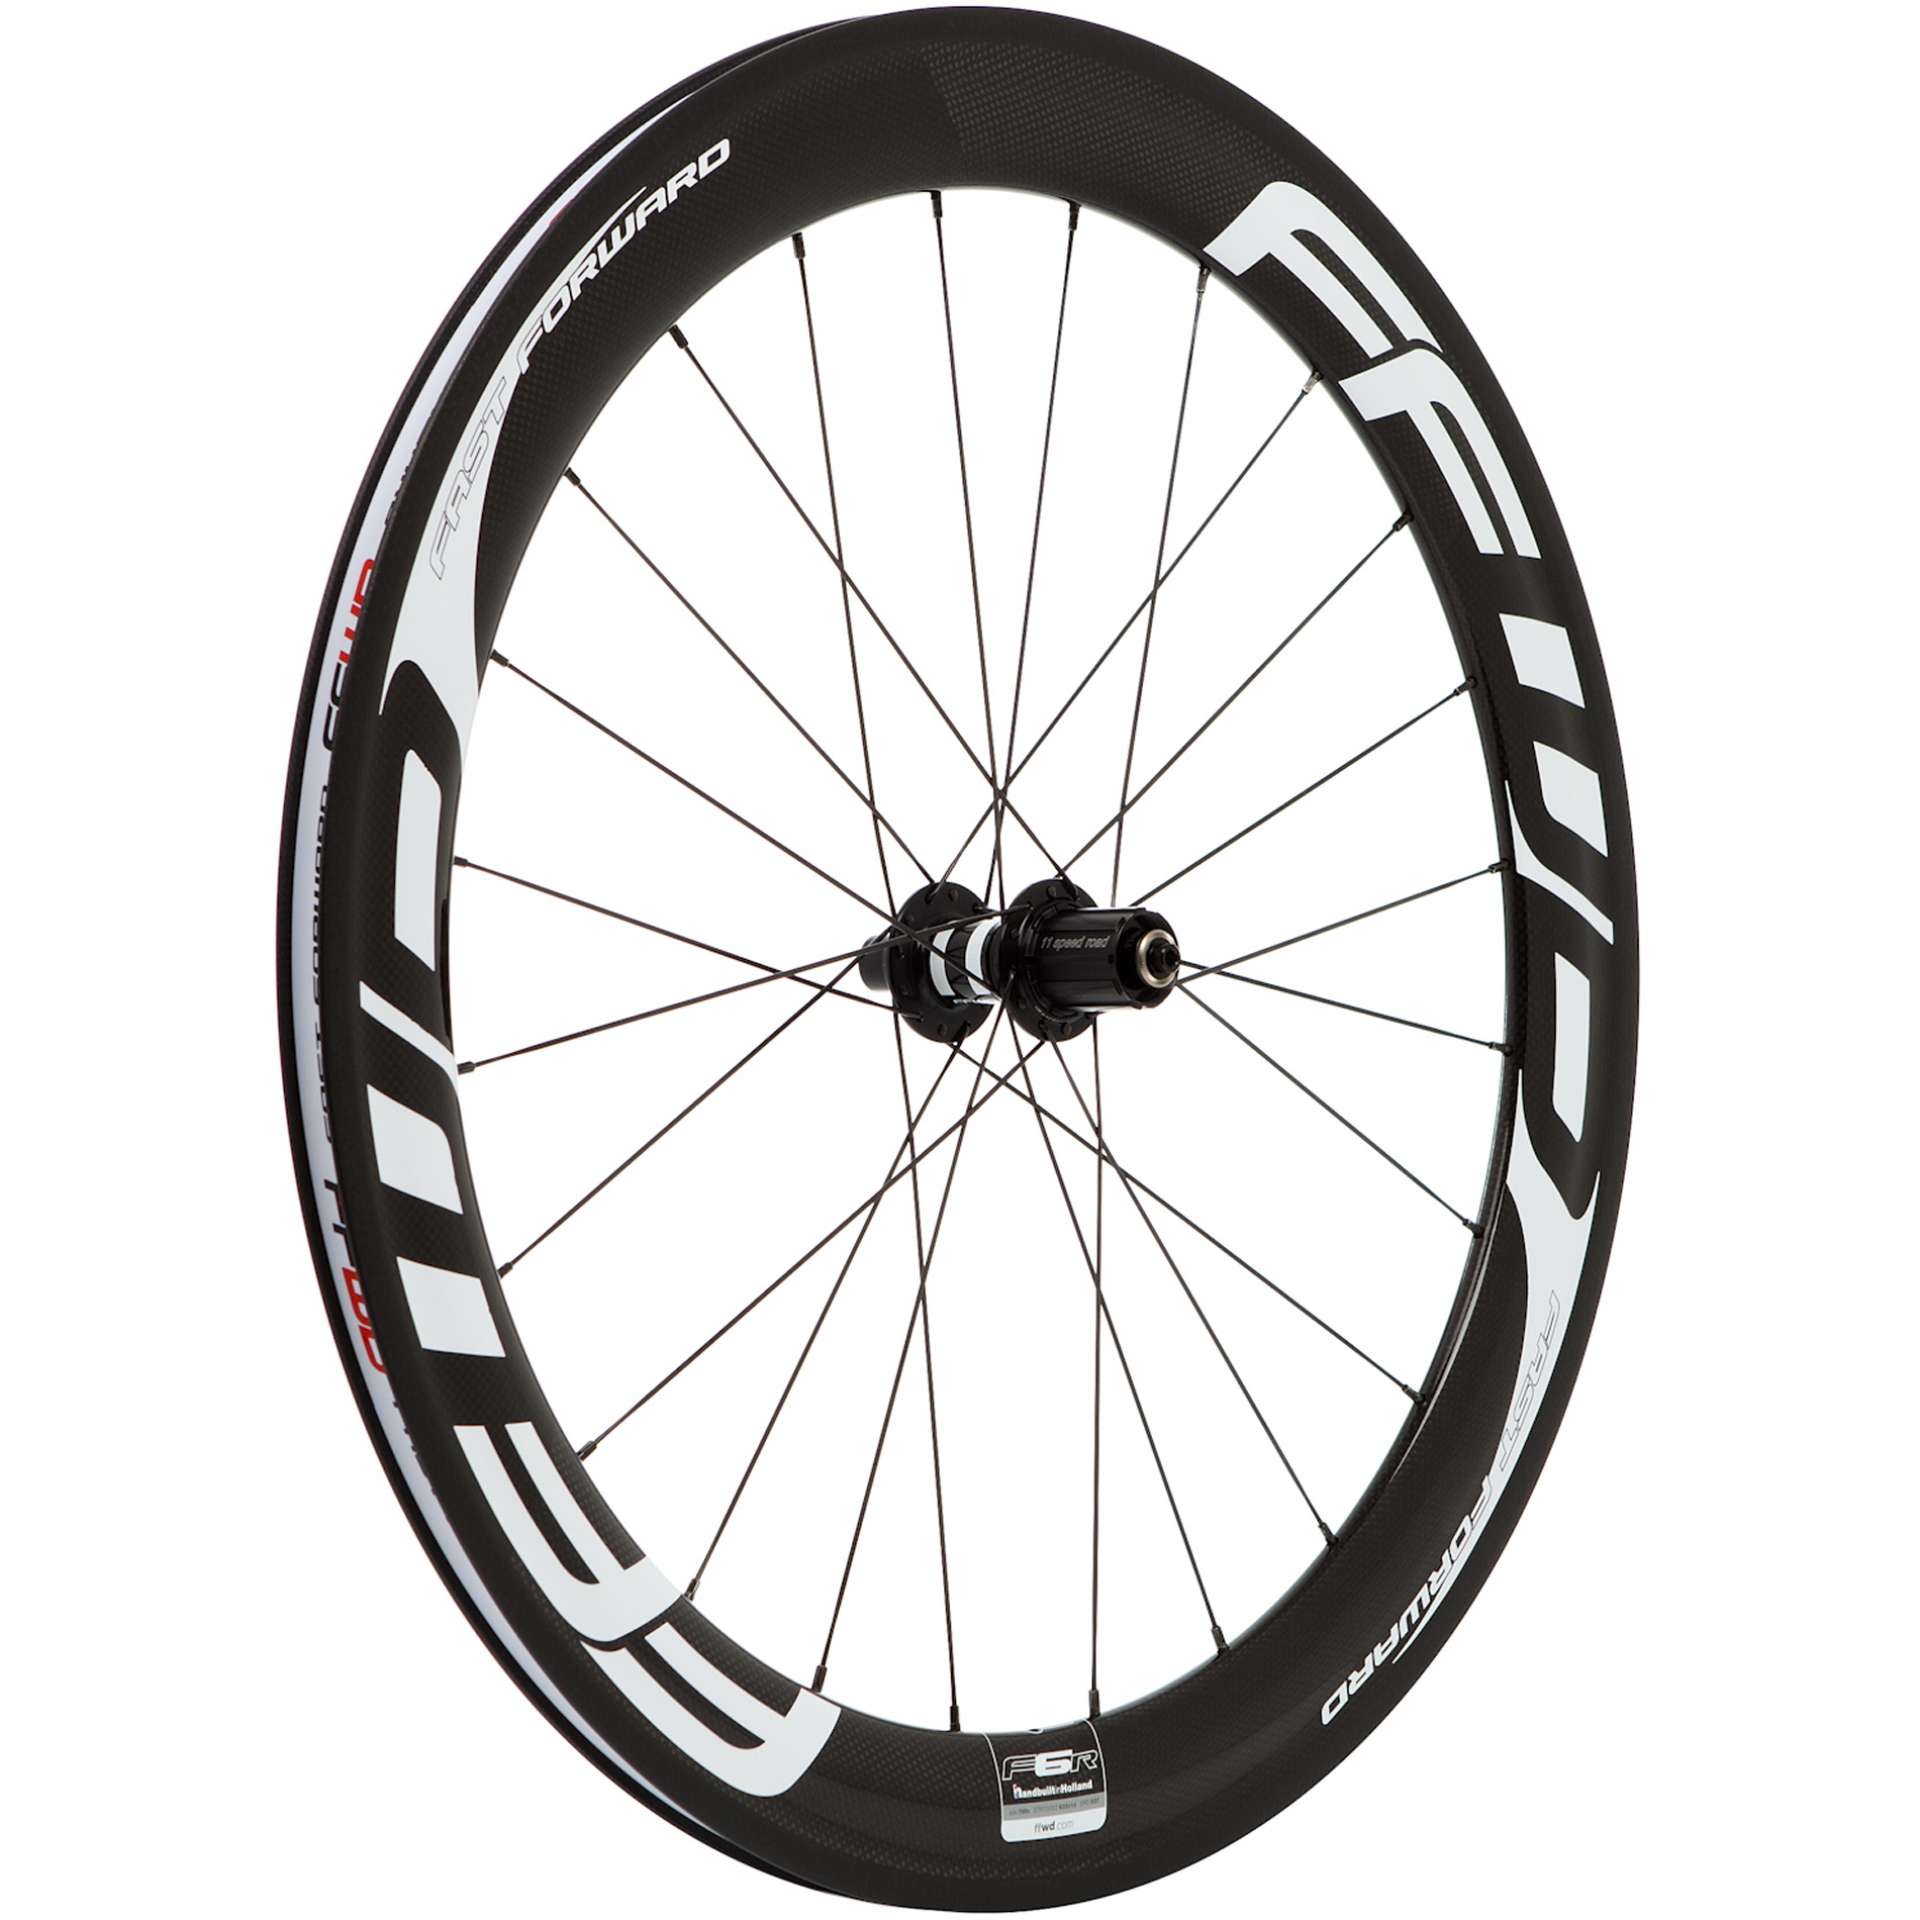 Fast Forward F6R Carbon Clincher Wielset met DT Swiss 240S Naaf Wit